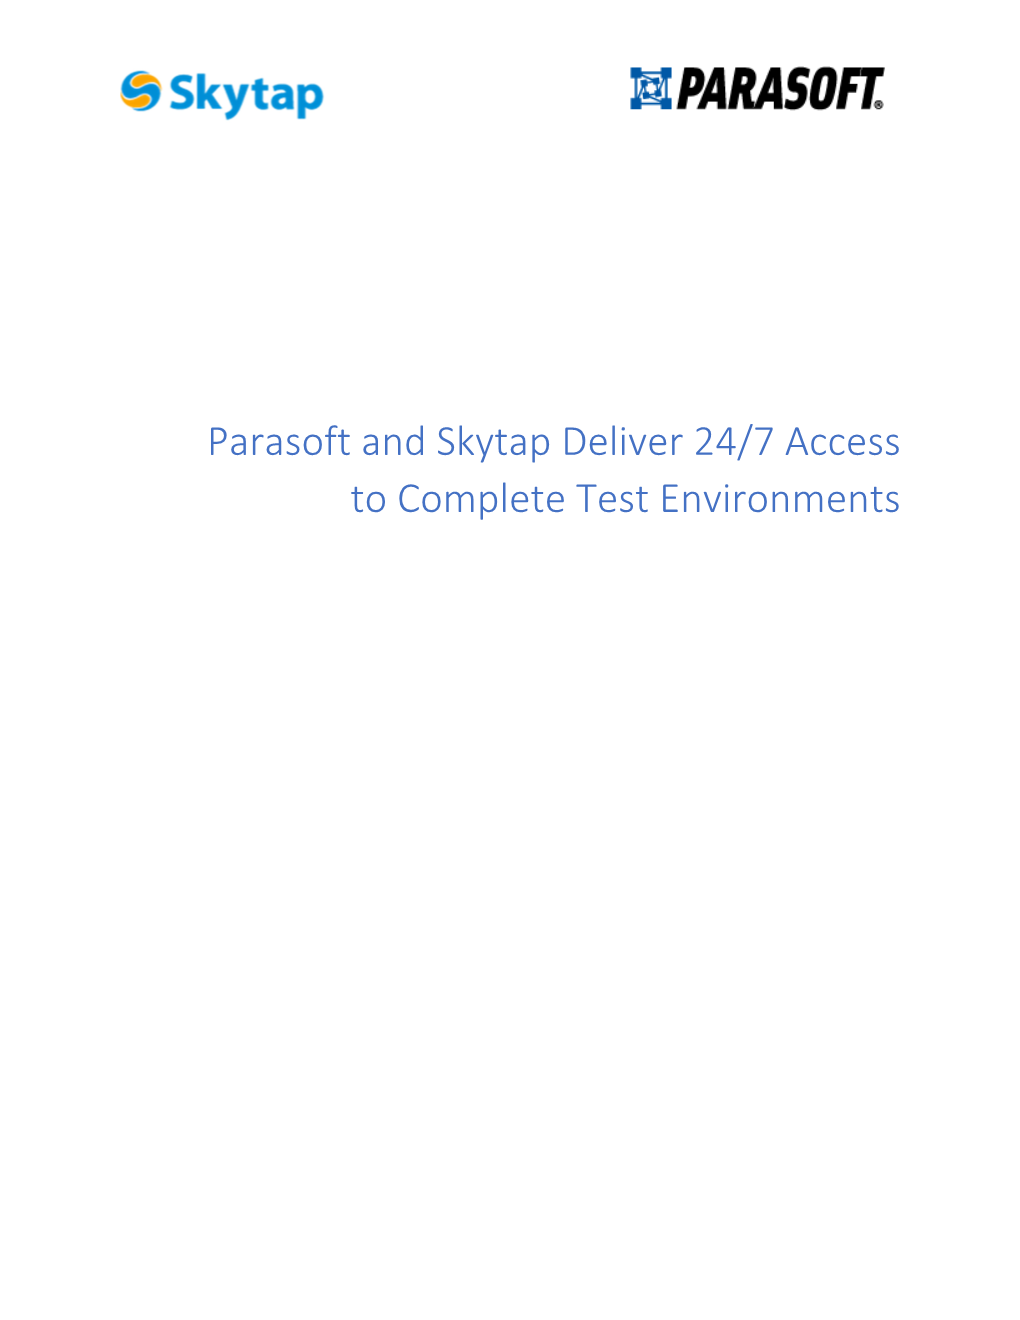 Parasoft and Skytap Deliver 24/7 Access to Complete Test Environments